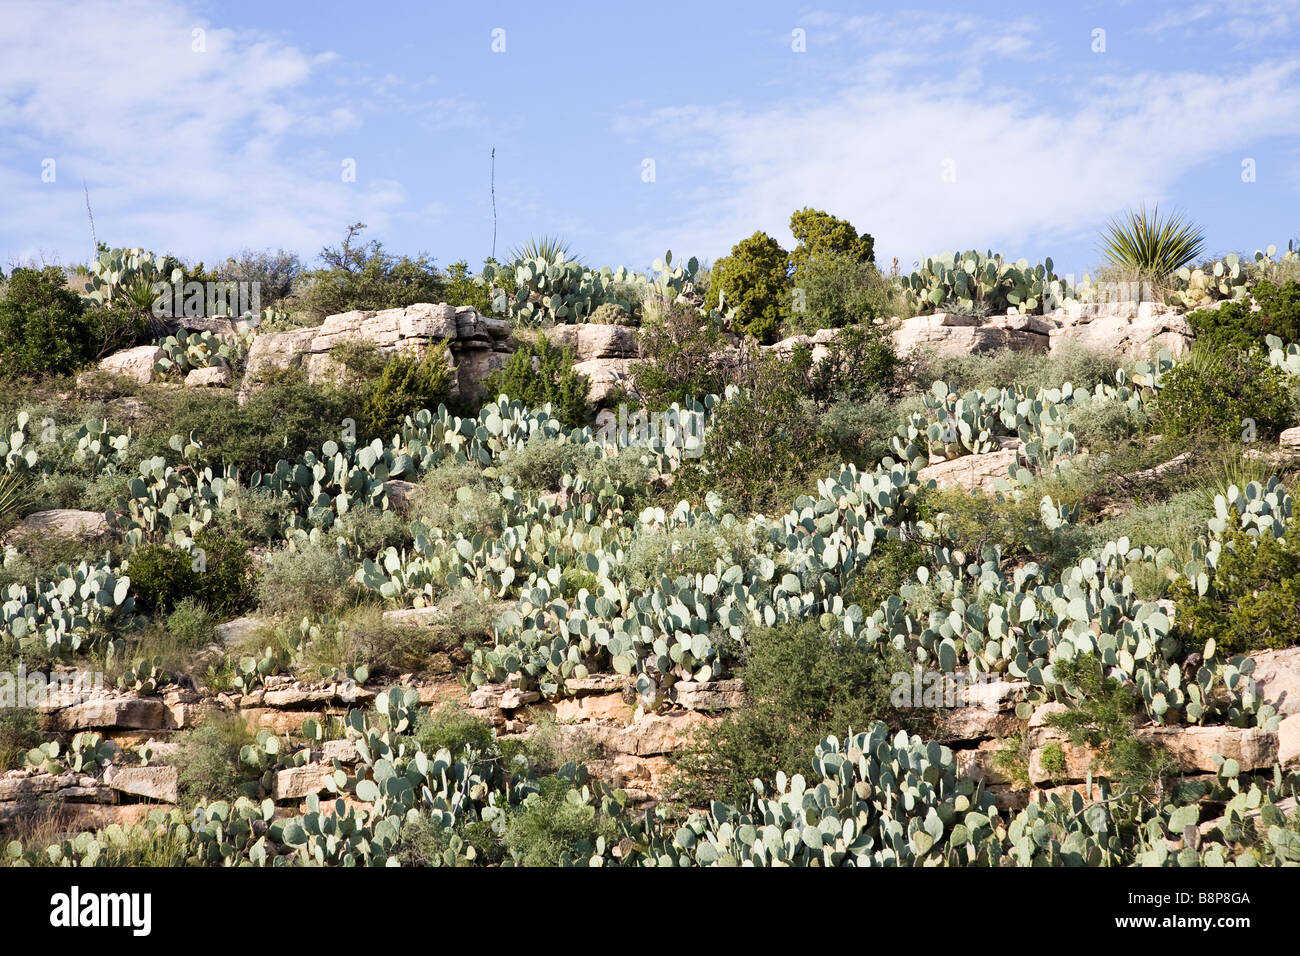 Alter Mann Prickly Pear Cactus, Carlsbad Caverns National Park, Carlsbad in New Mexico, USA Stockfoto